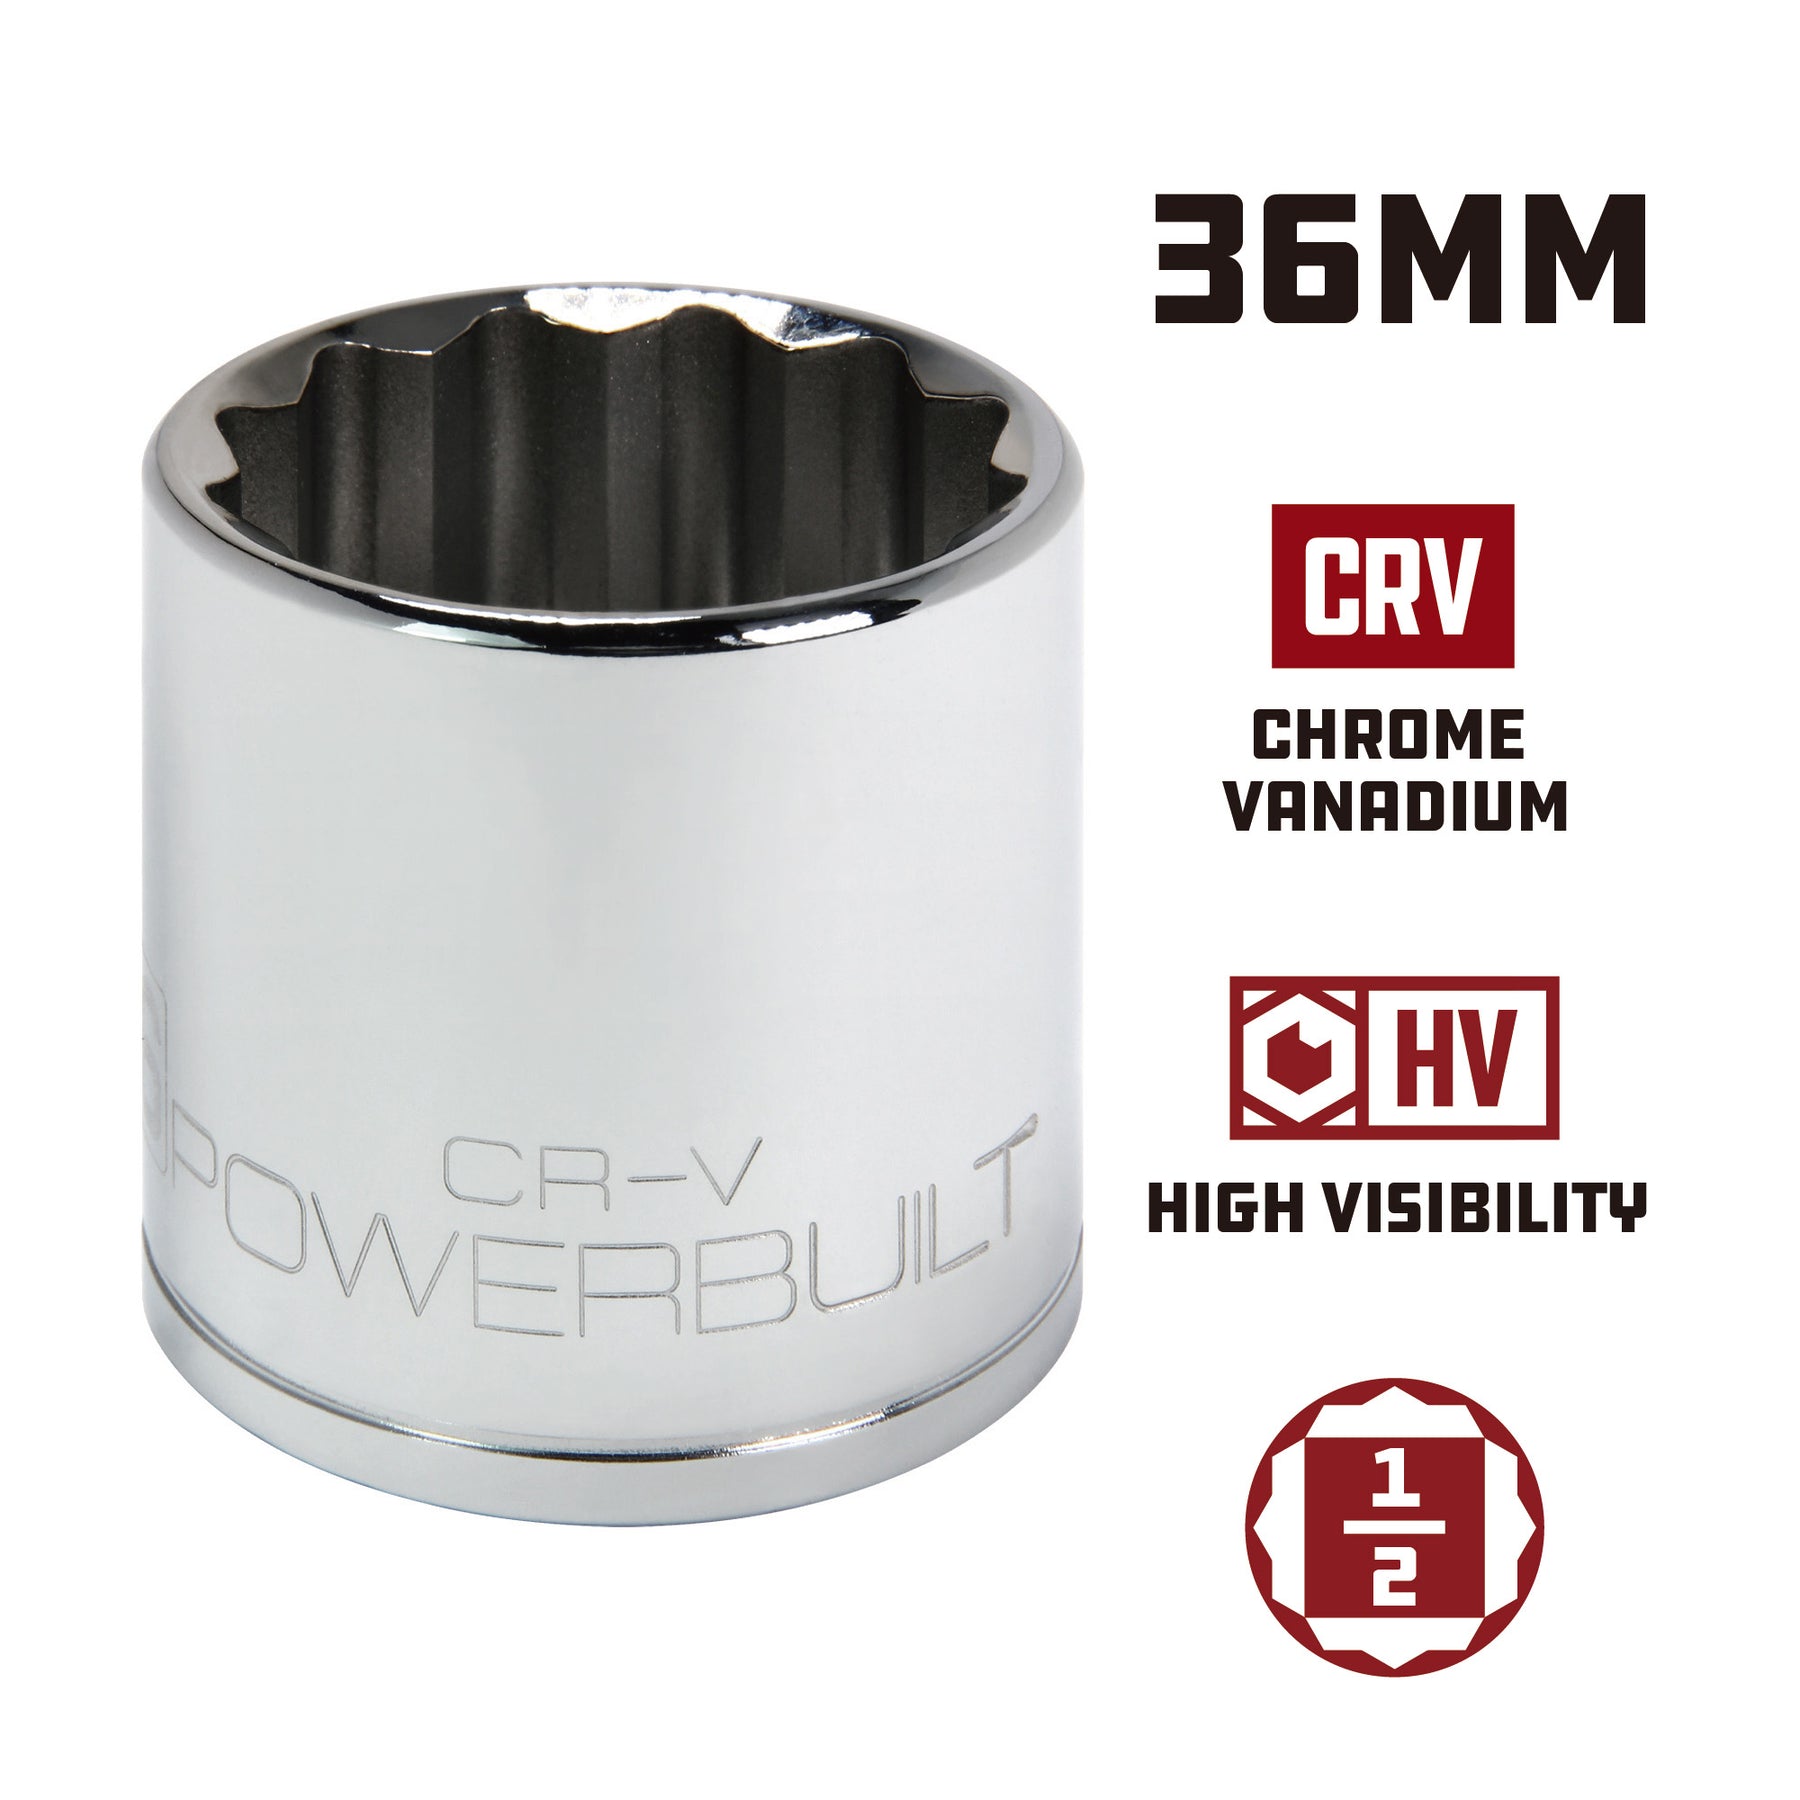 1/2 Inch Drive x 36 MM 12 Point Shallow Socket